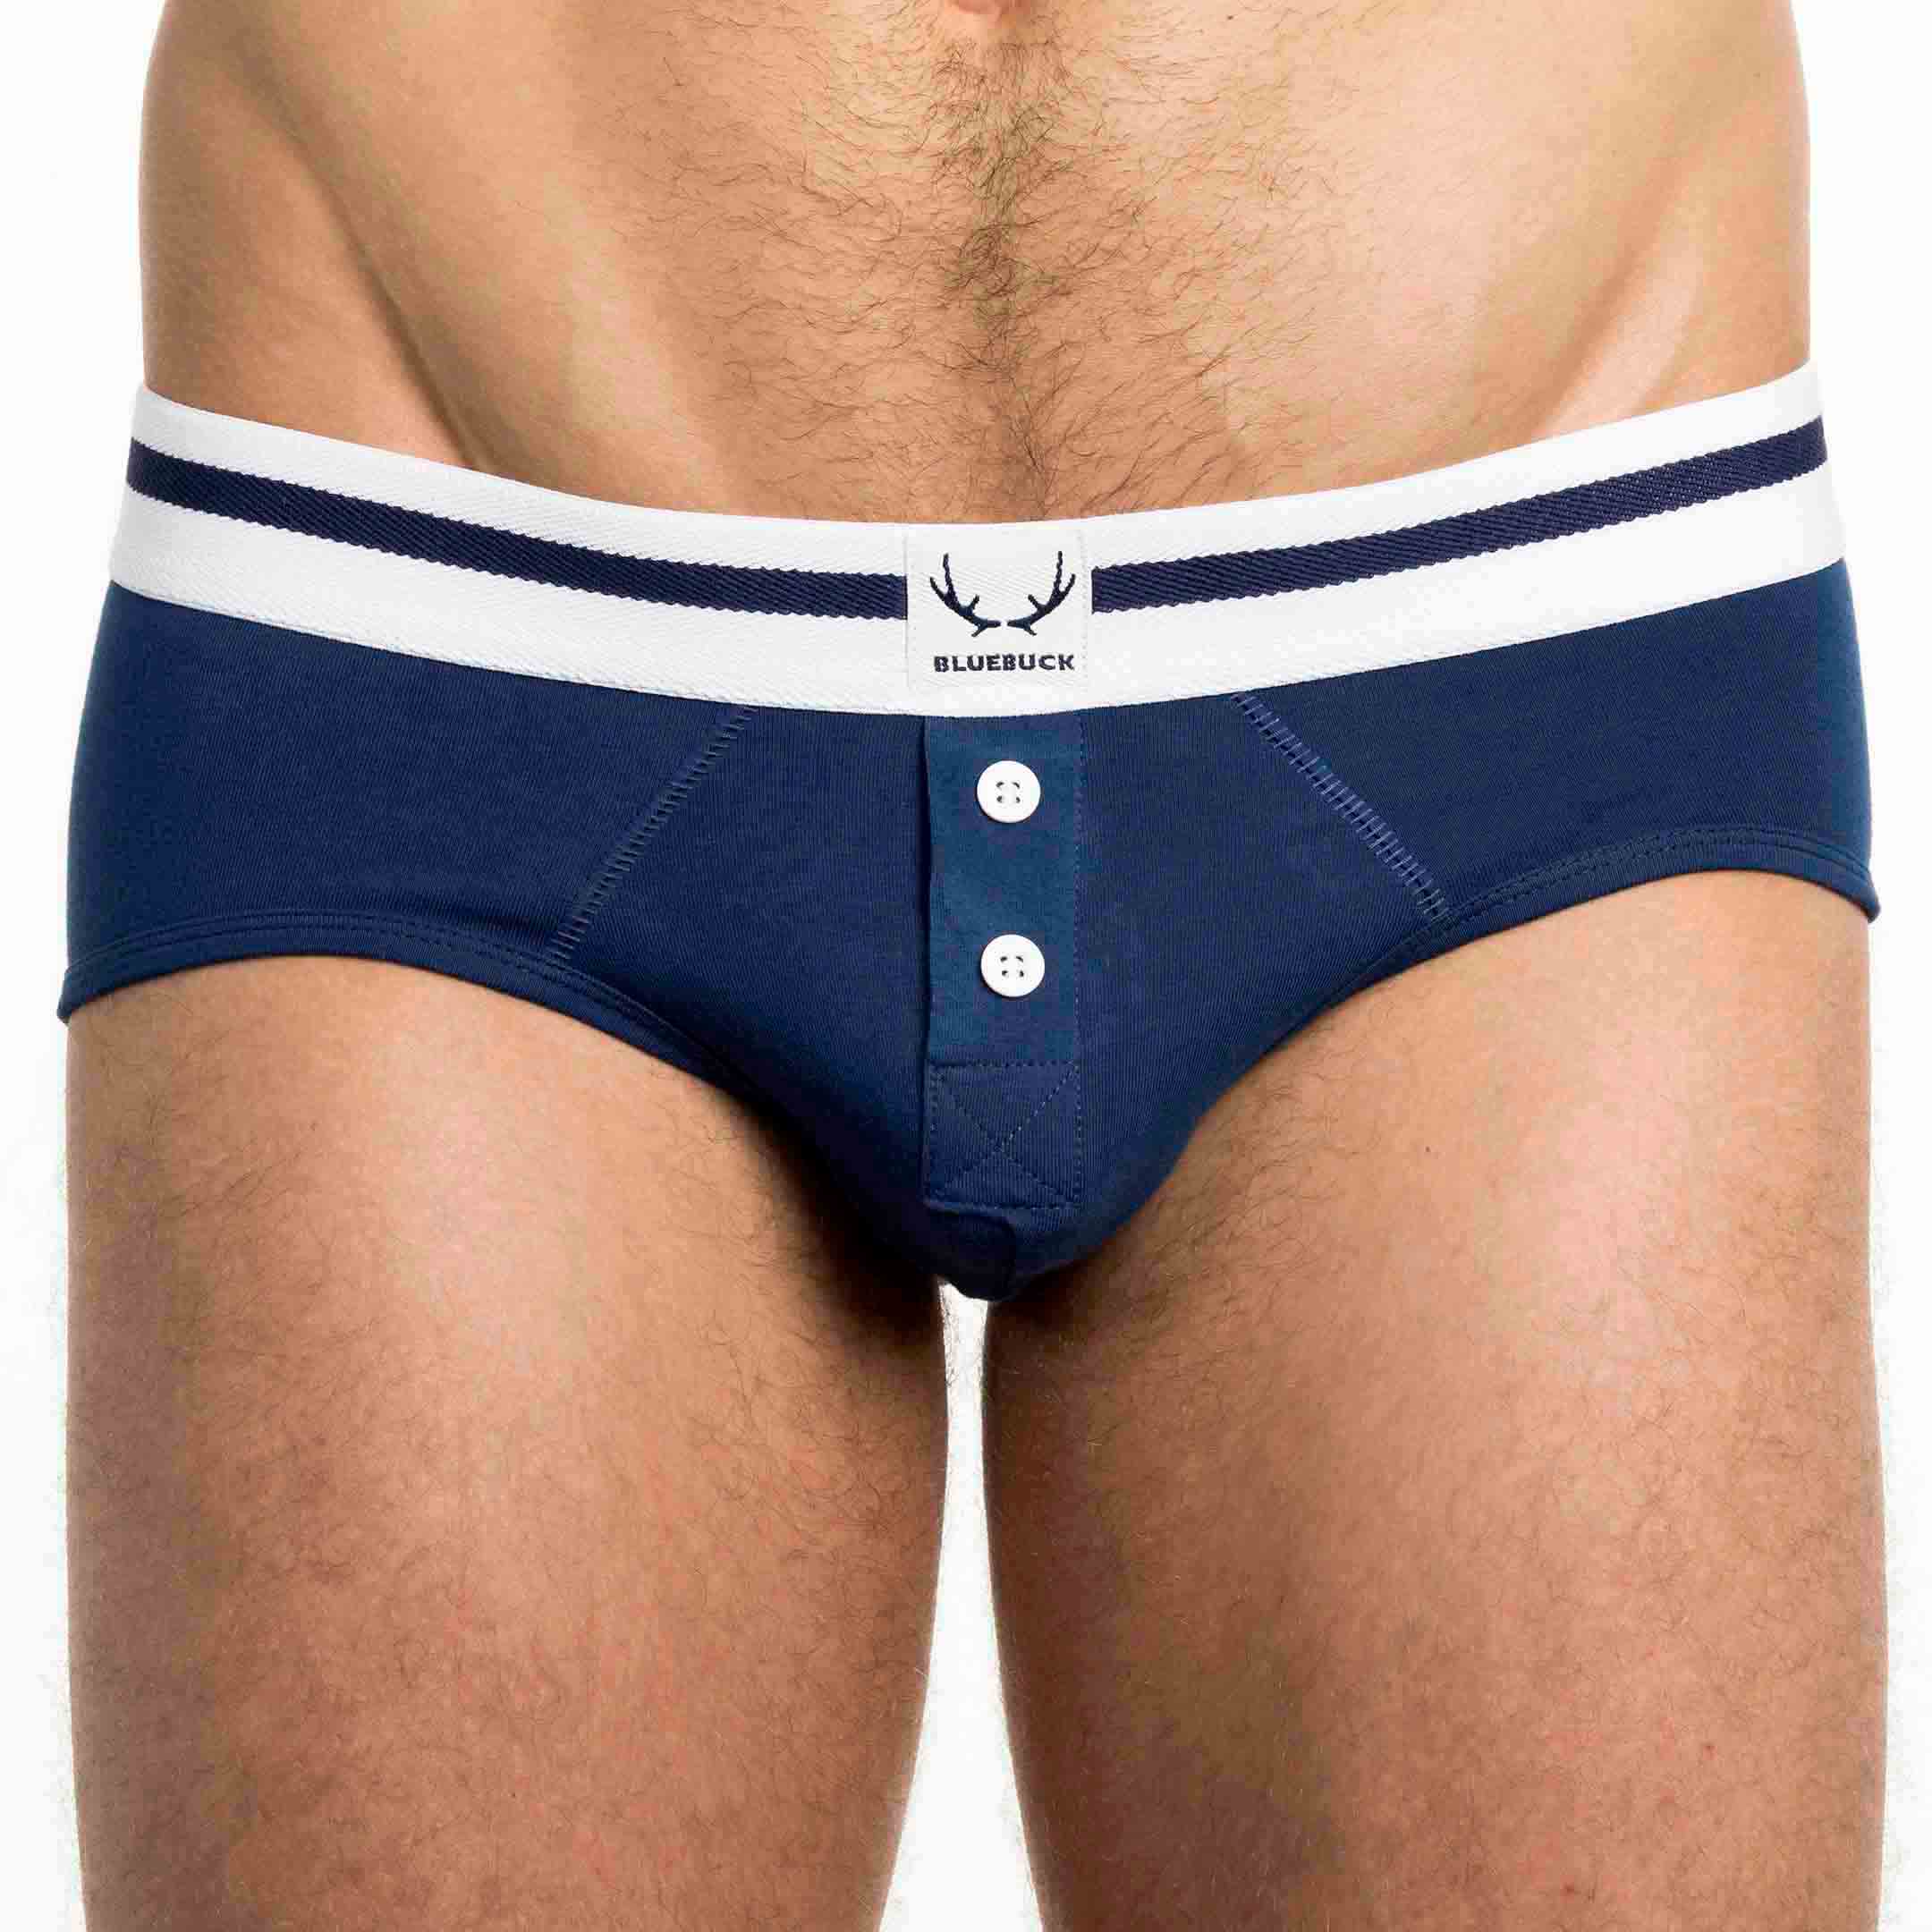 Navy blue underpants with white buttons made of organic cotton from Bluebuck